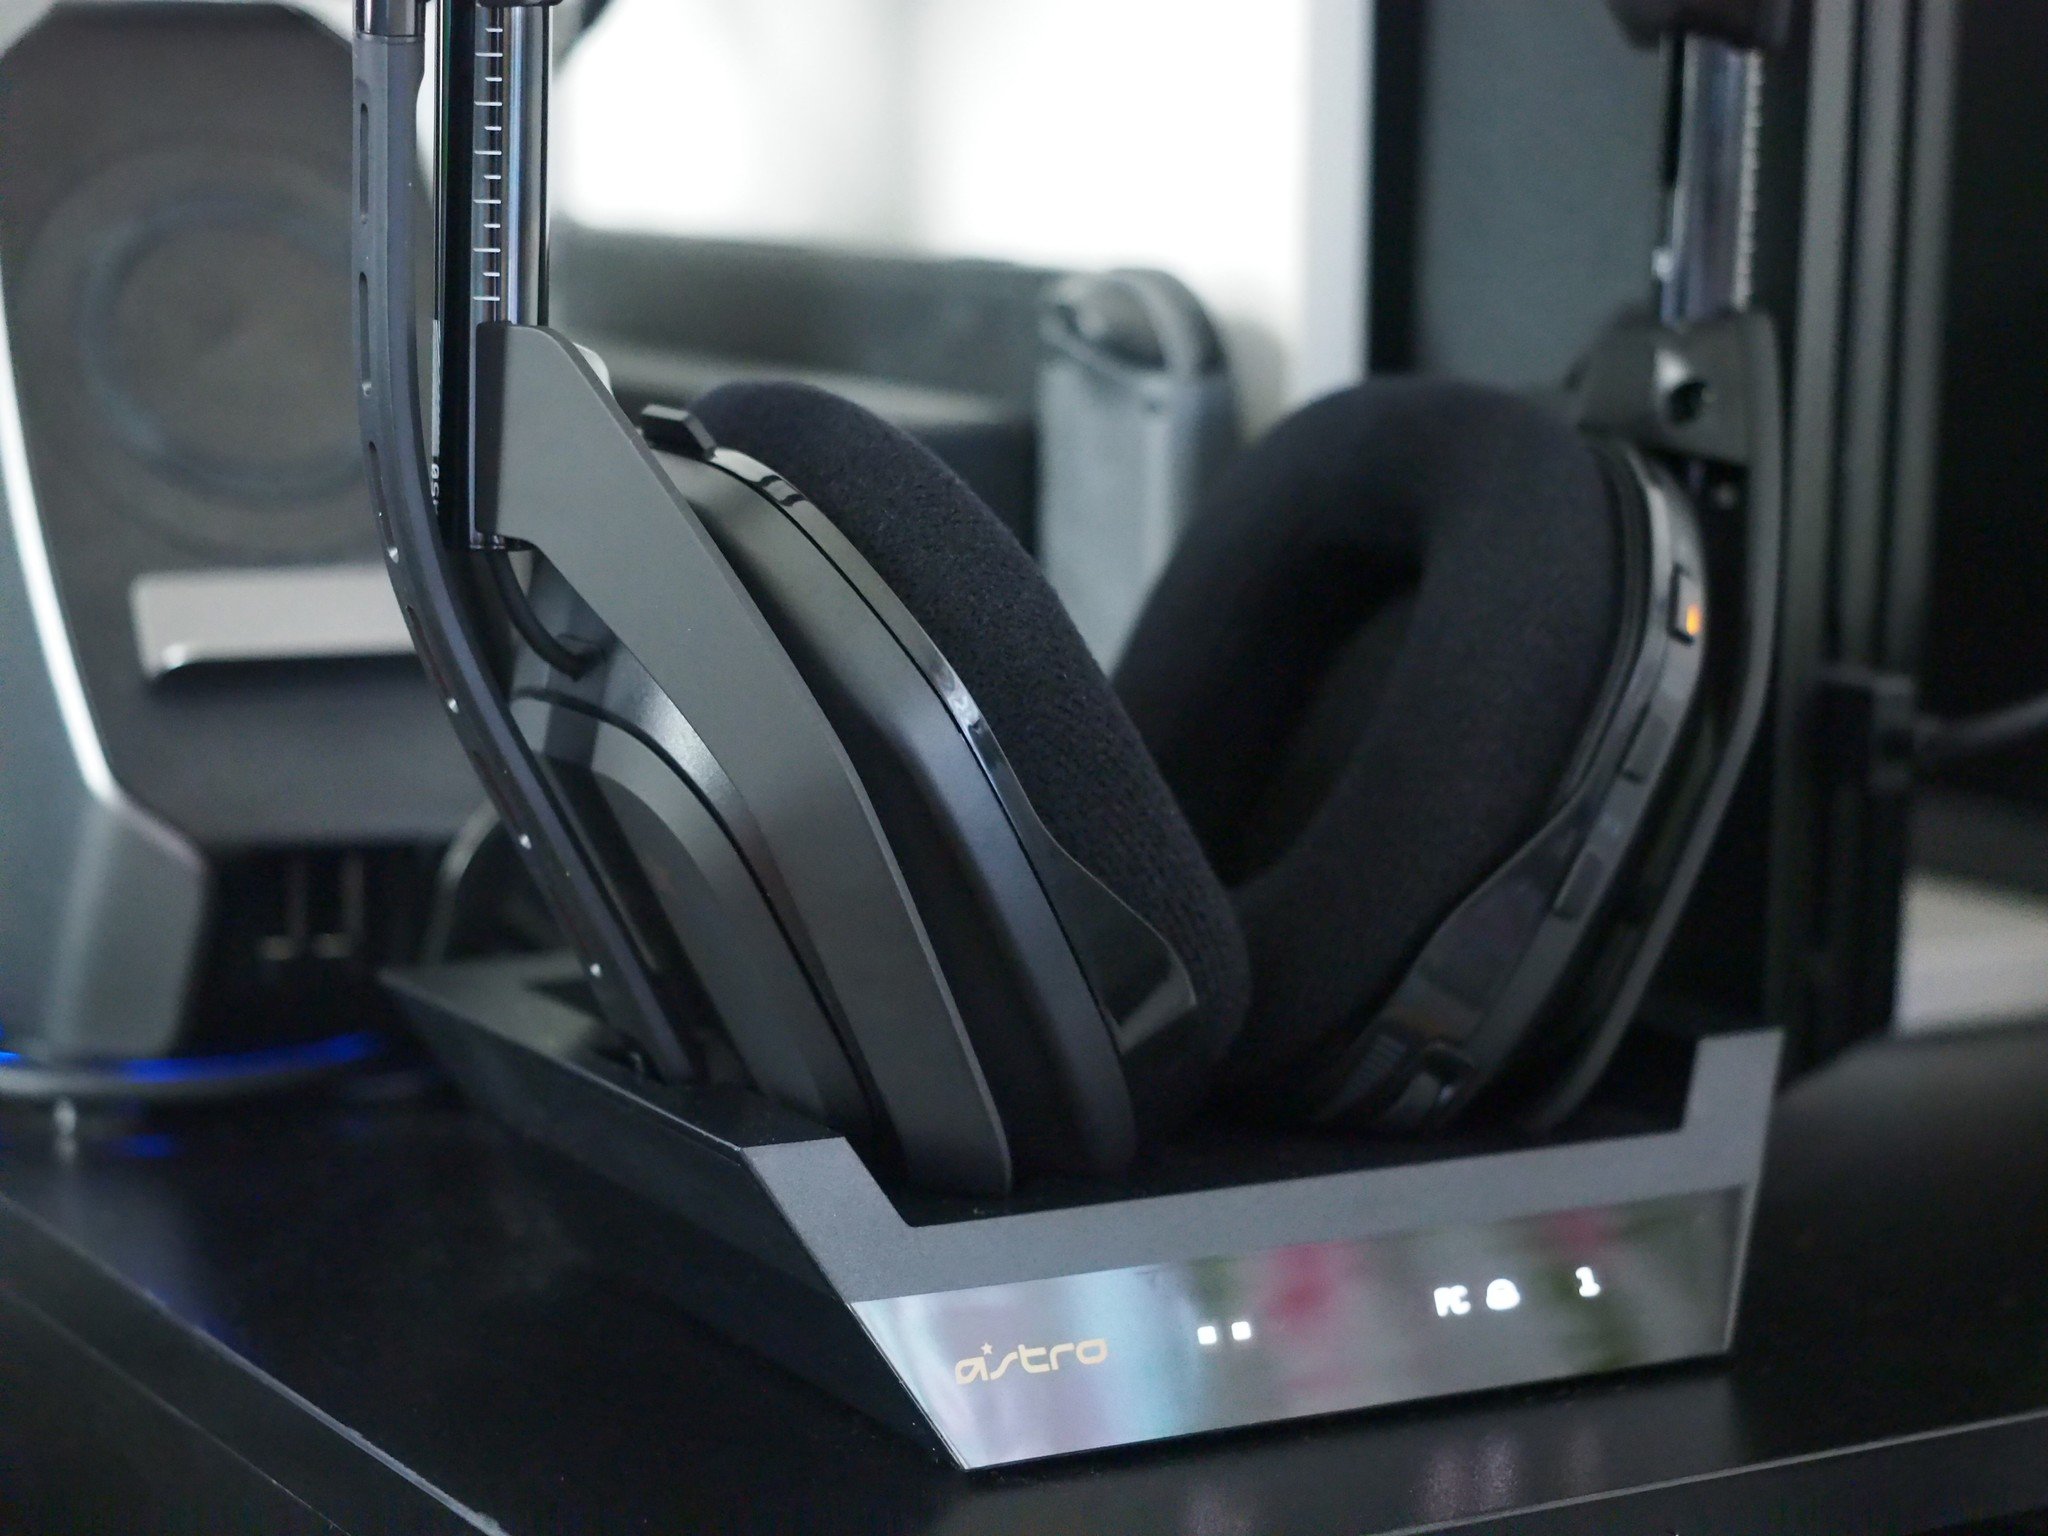 astro a50 docking station